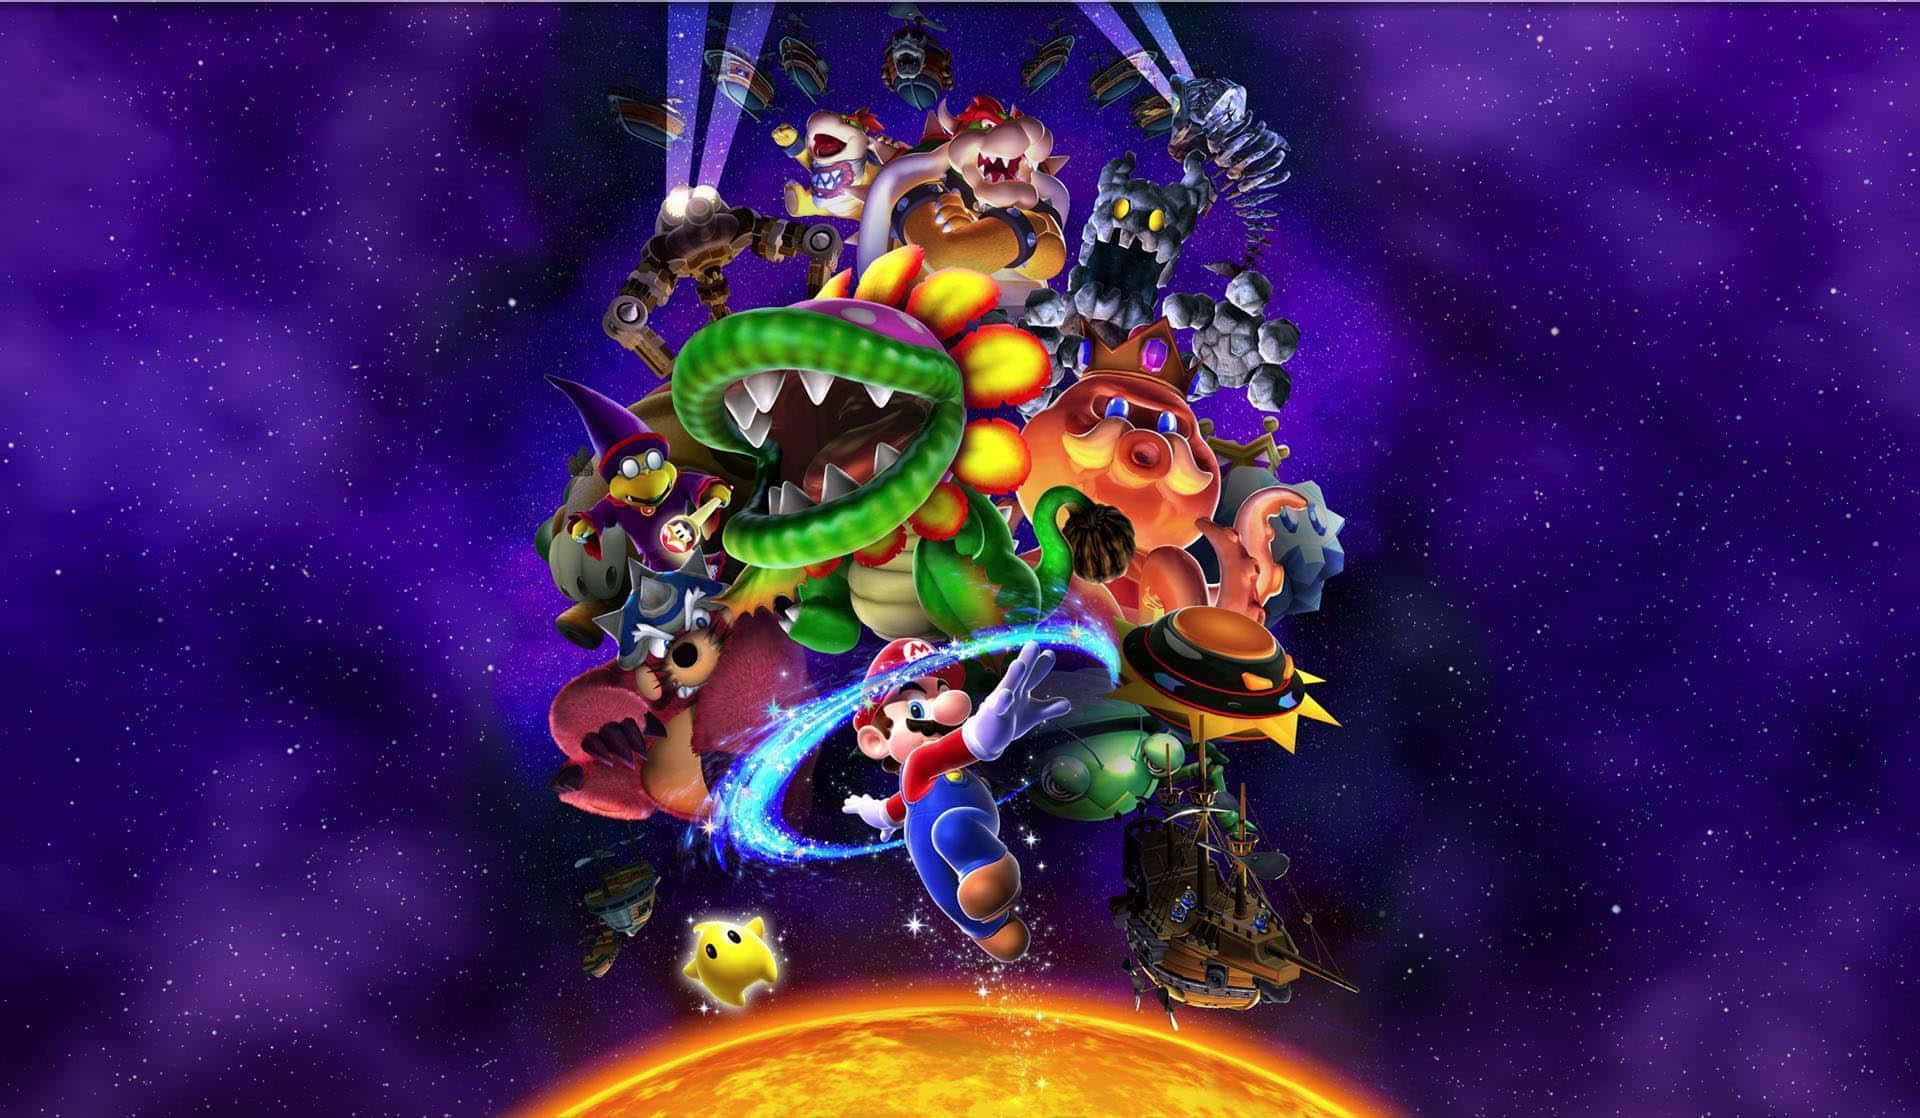 Super Mario Galaxy 2 Gameplay Adventure in Outer Space Wallpaper